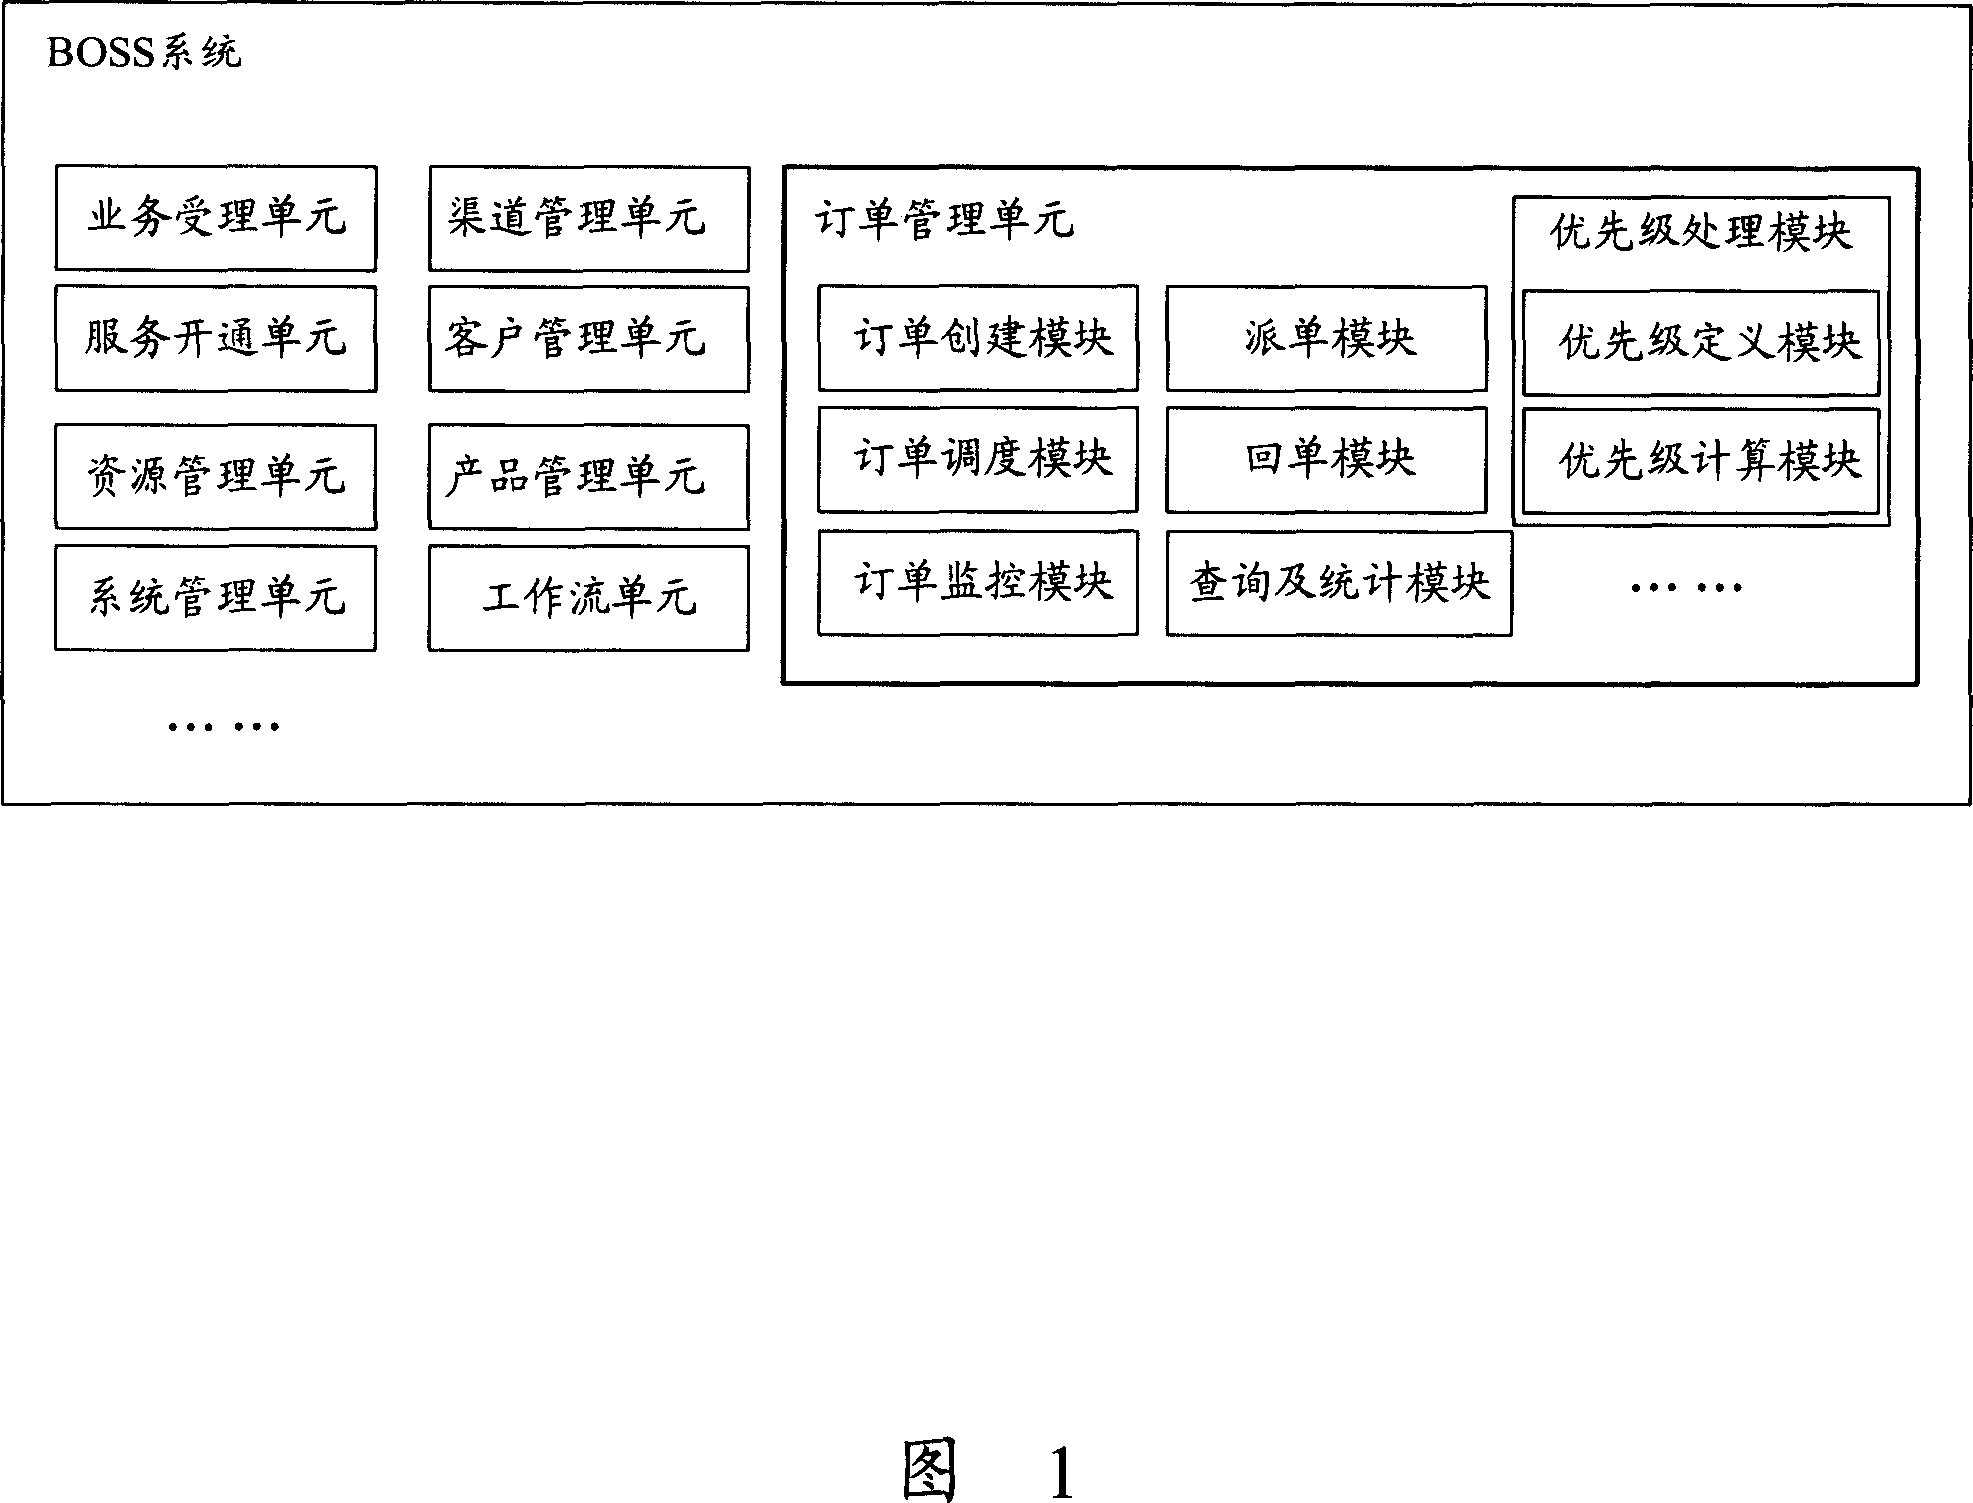 System and method for realizing order dispatch based on priority level